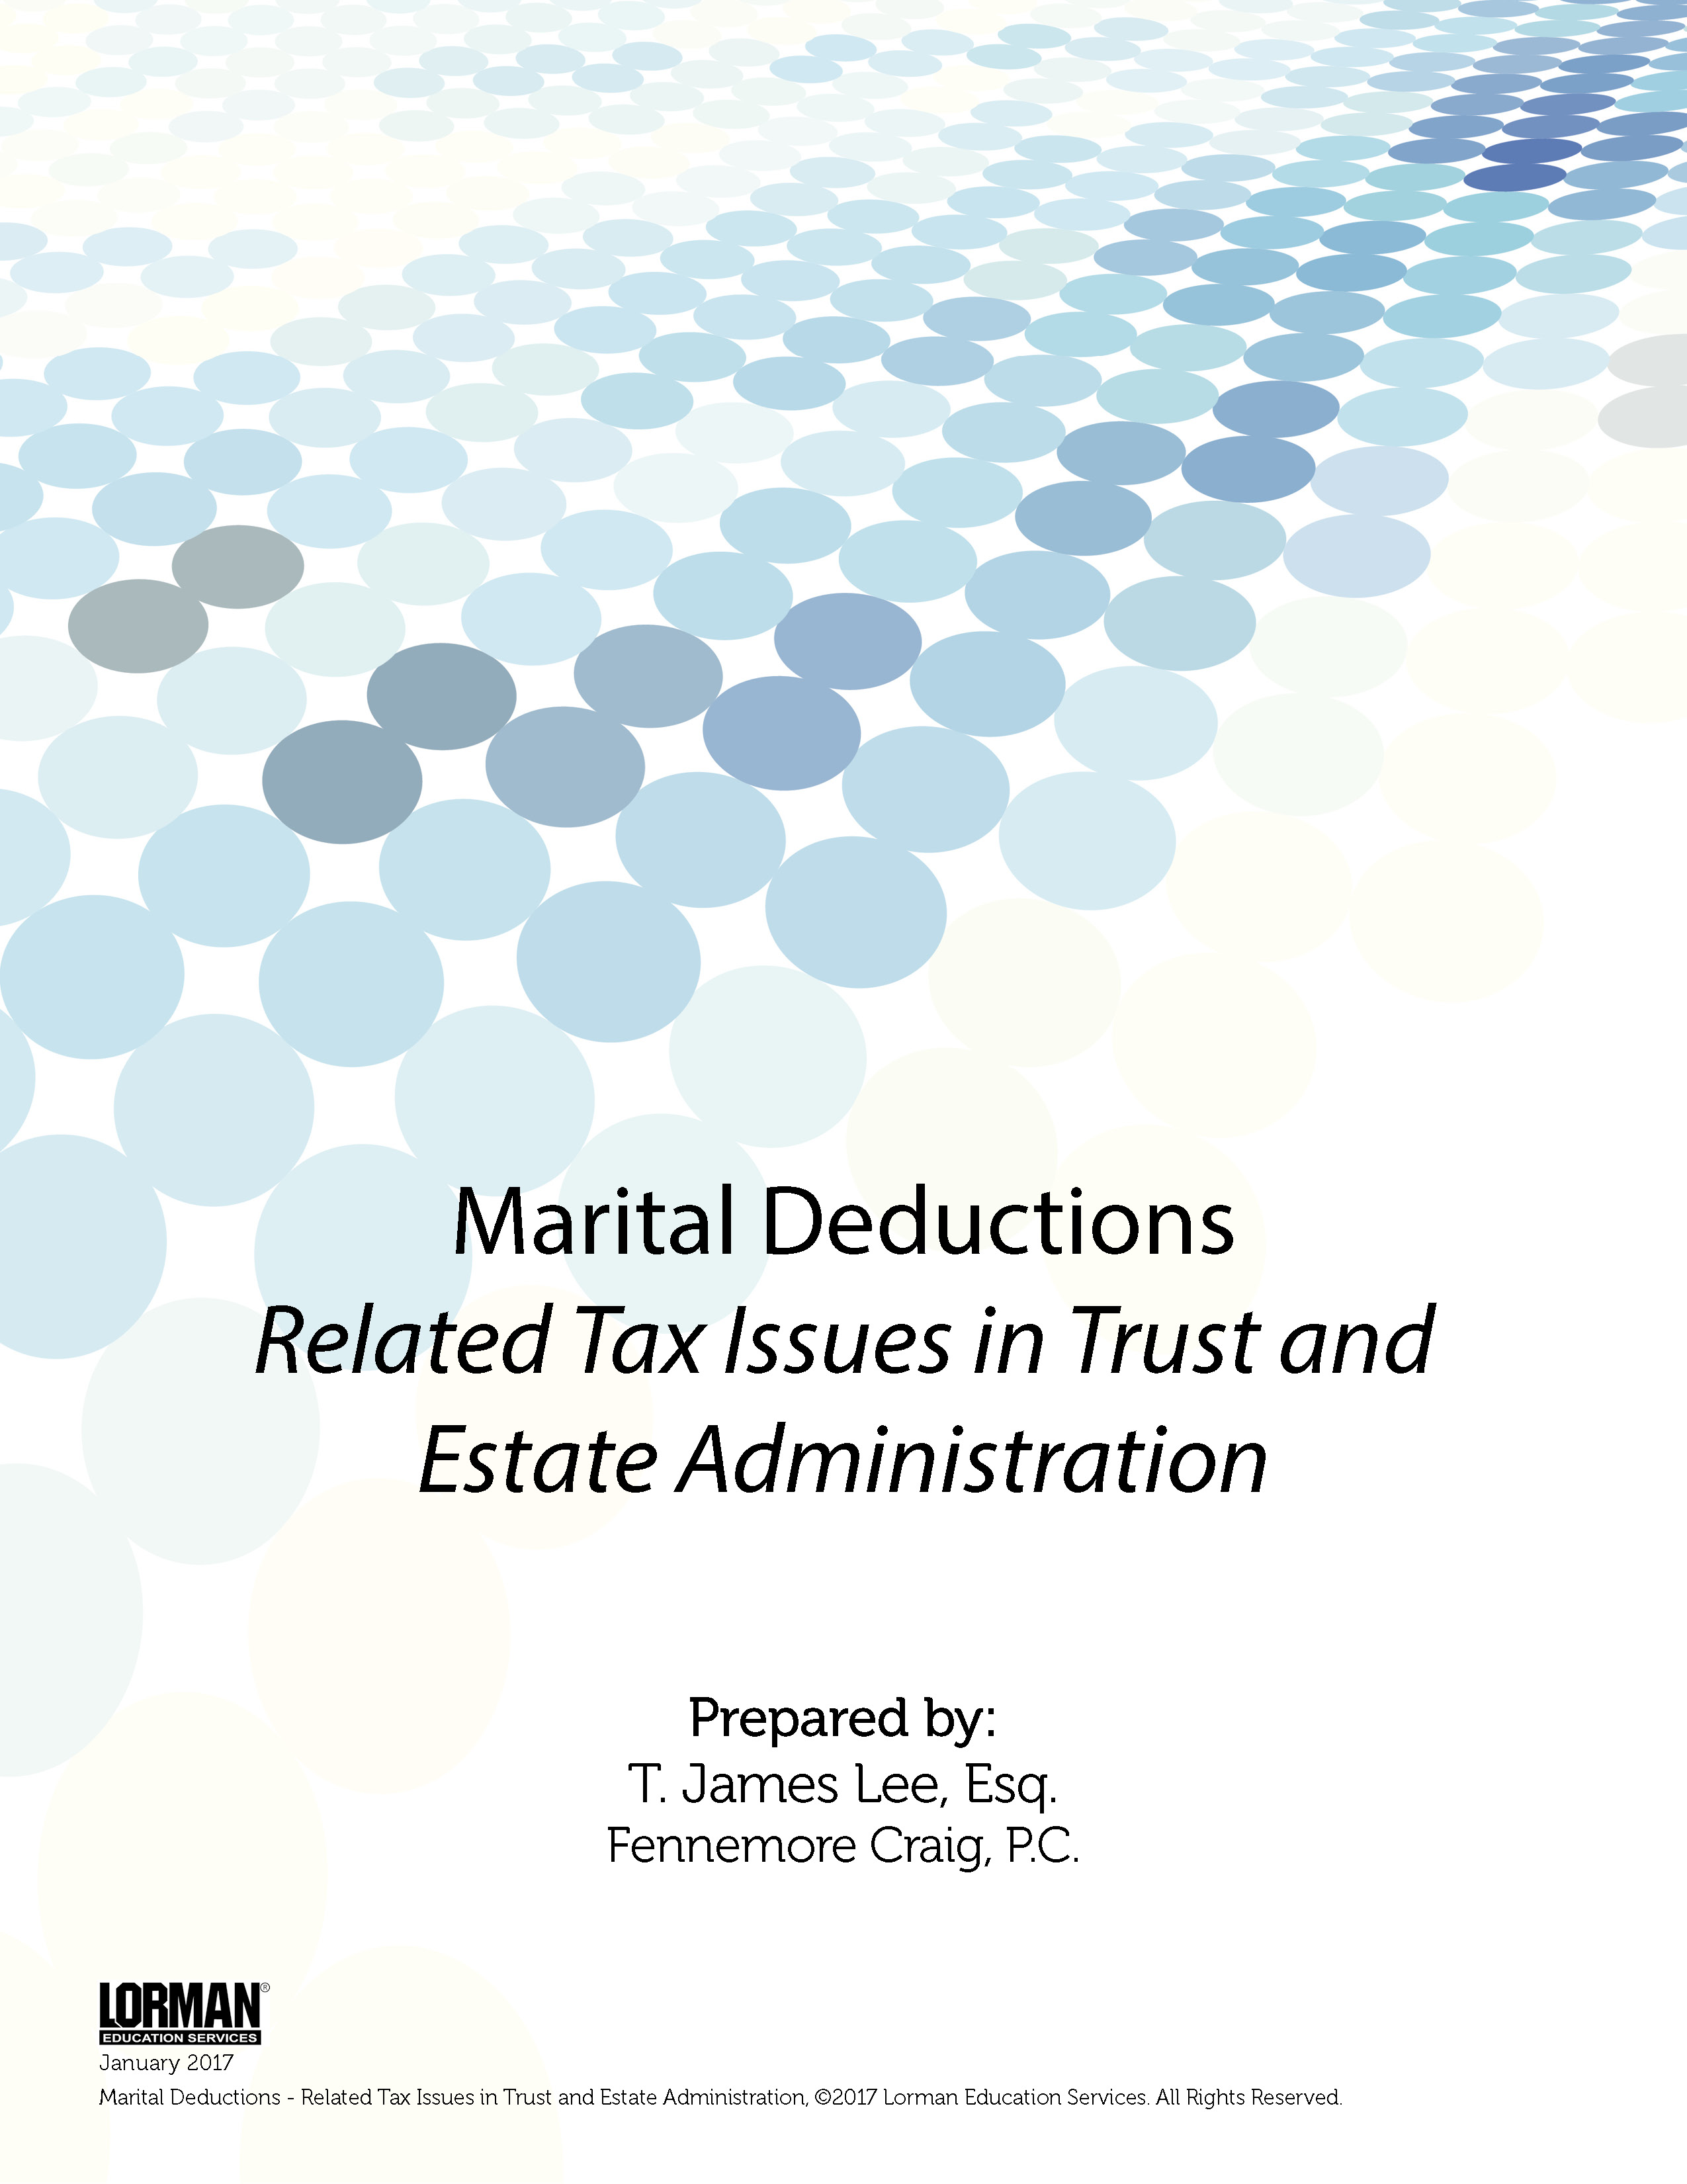 Marital Deductions - Related Tax Issues in Trust and Estate Administration